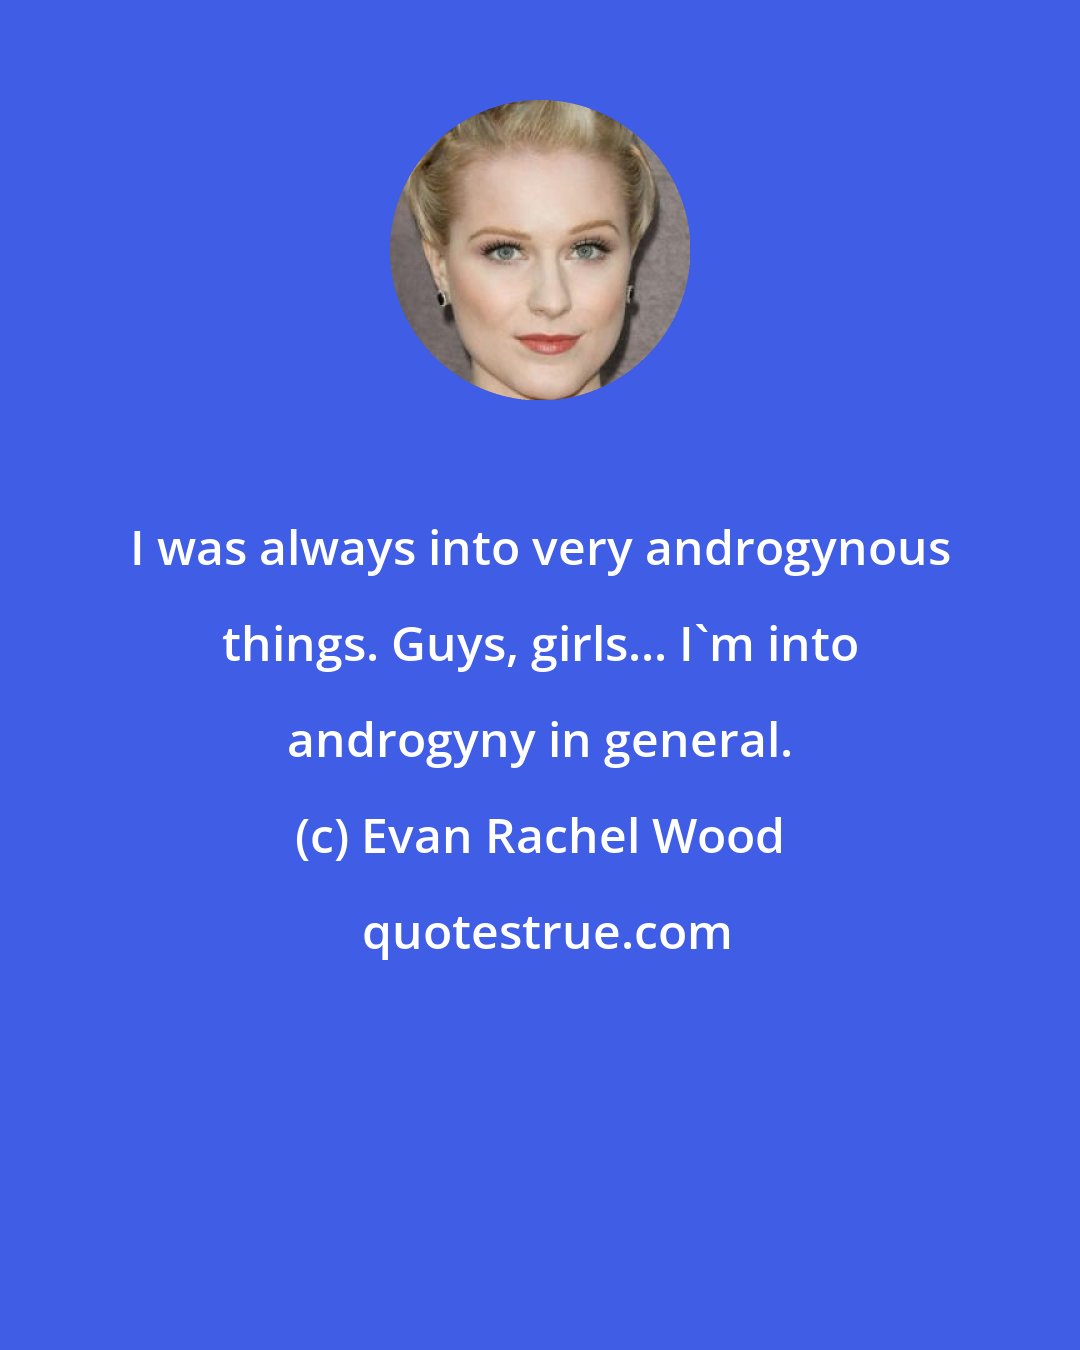 Evan Rachel Wood: I was always into very androgynous things. Guys, girls... I'm into androgyny in general.